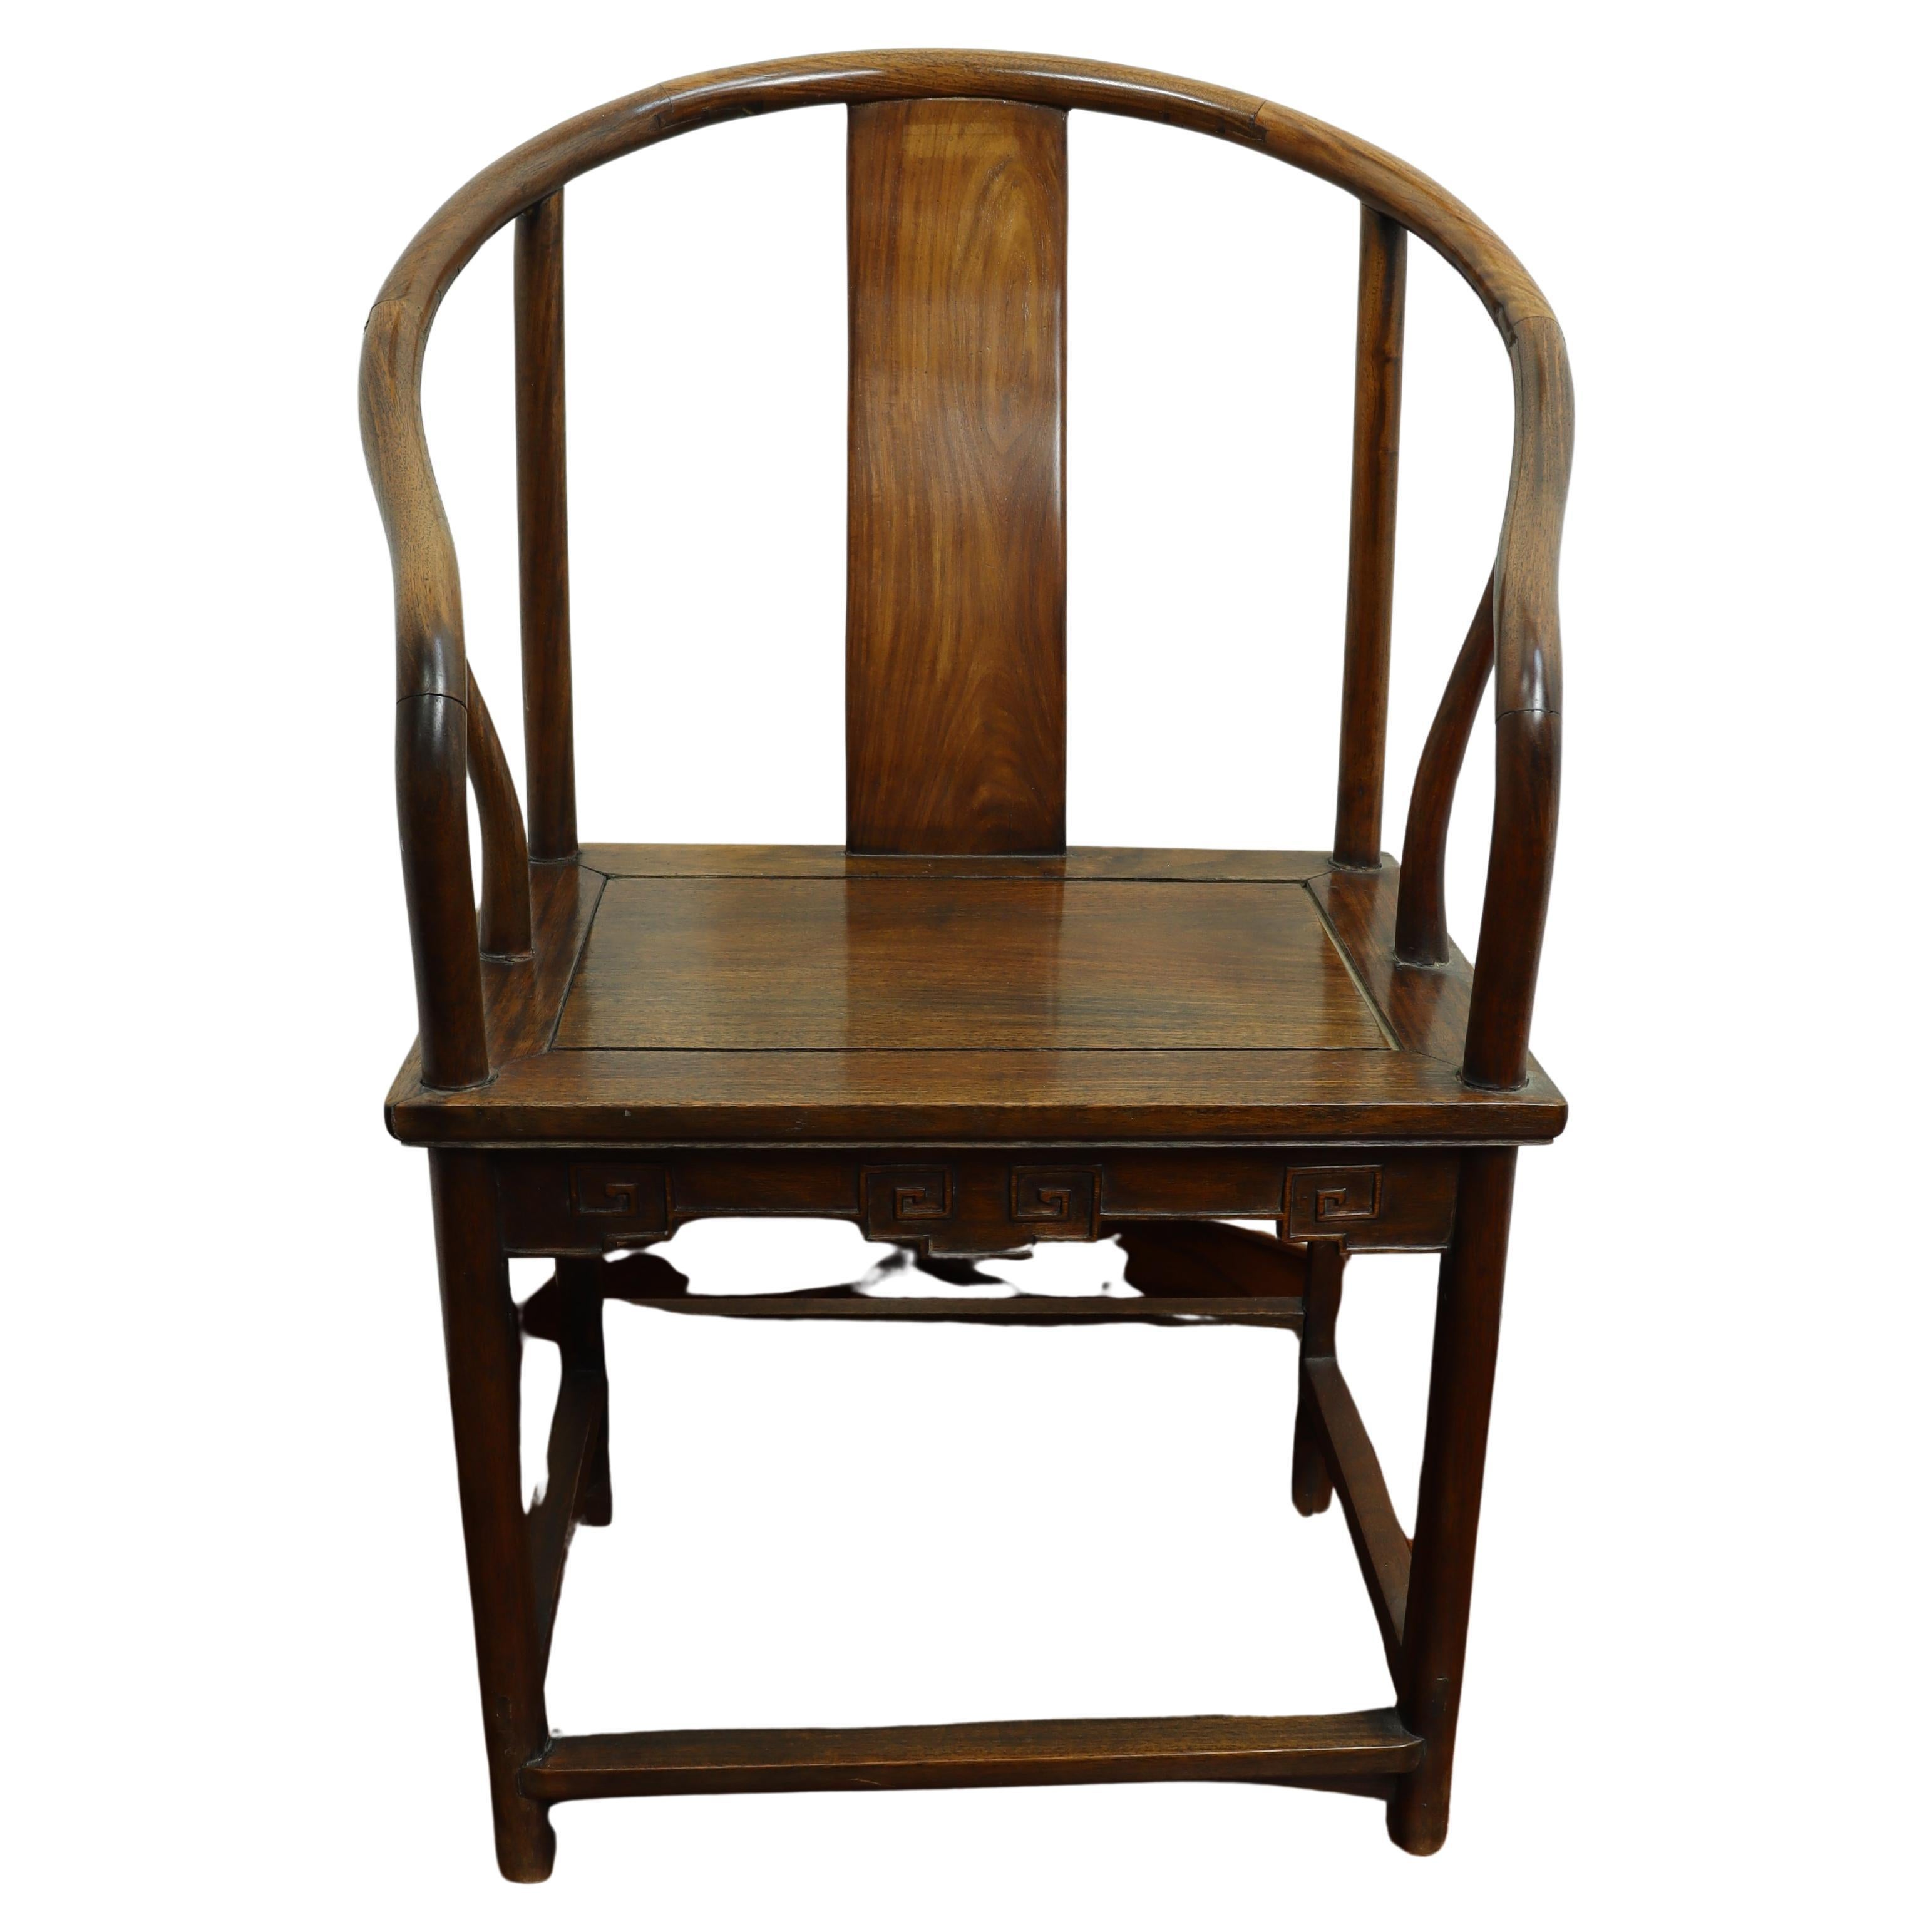 Antique Carved Chinese Hardwood Horseshoe Chair Late 19th Century For Sale